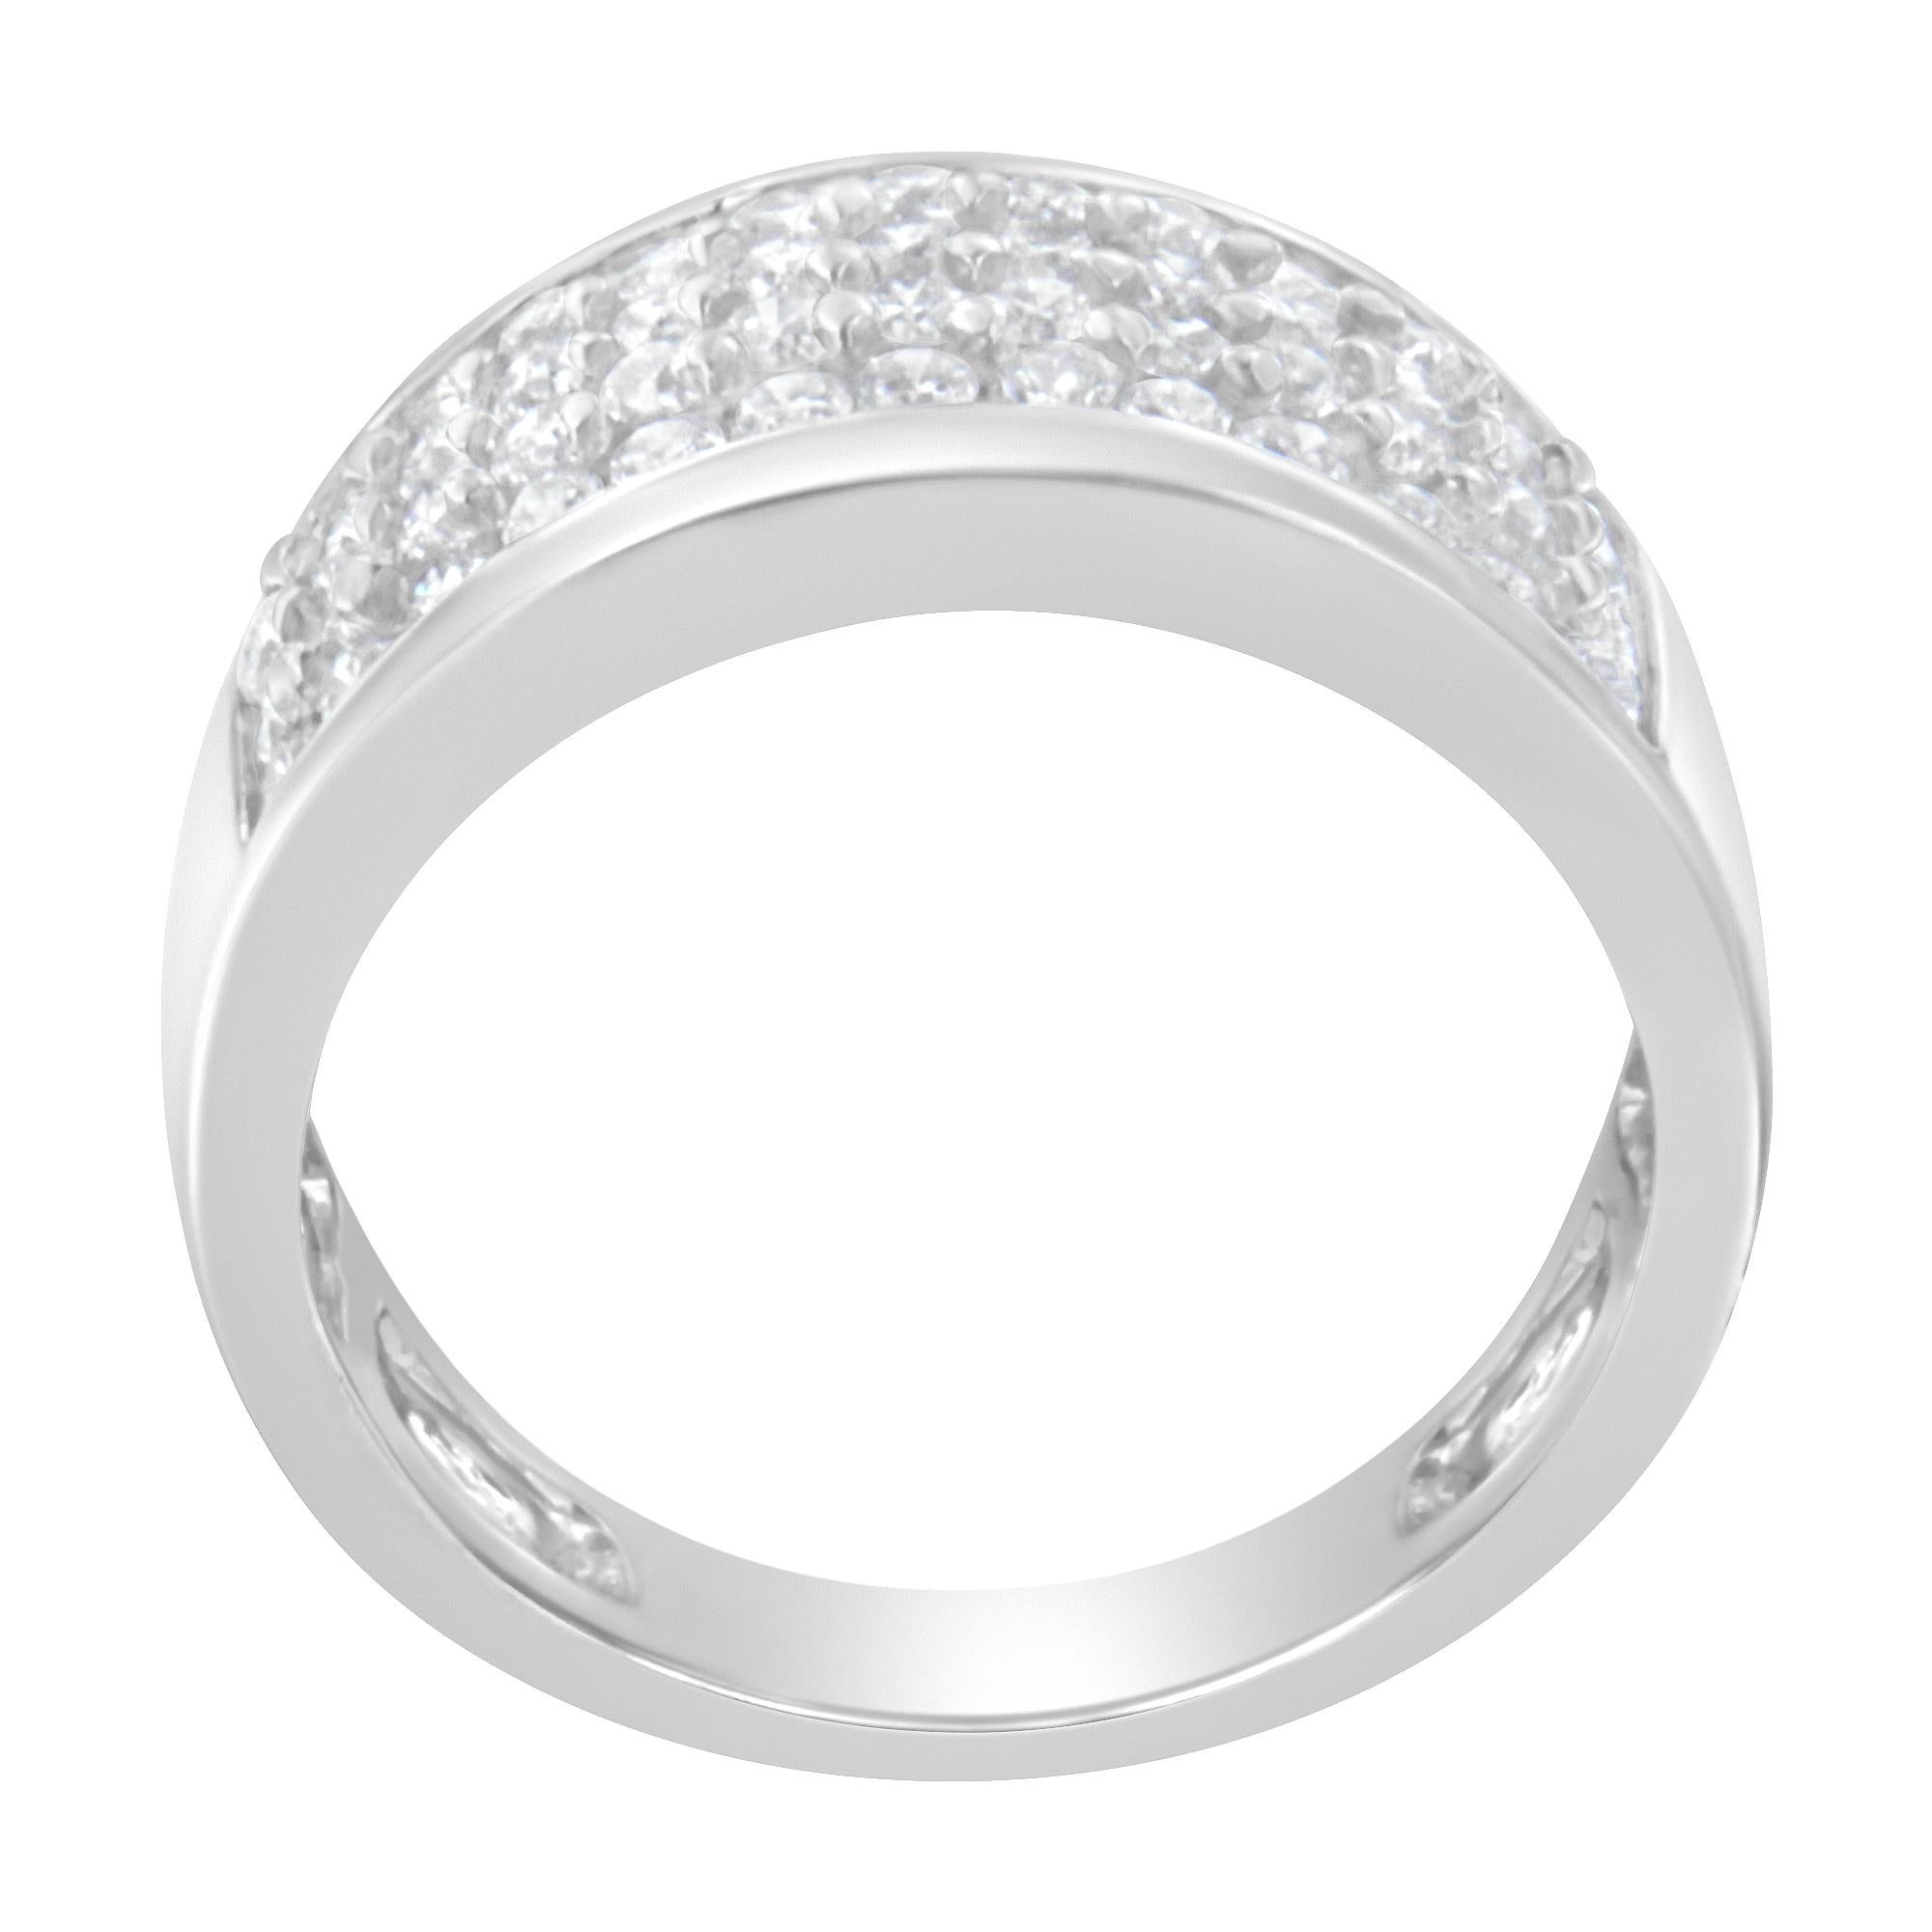 For Sale:  14K White Gold 1.00 Carat Diamond Cocktail Band Ring 3